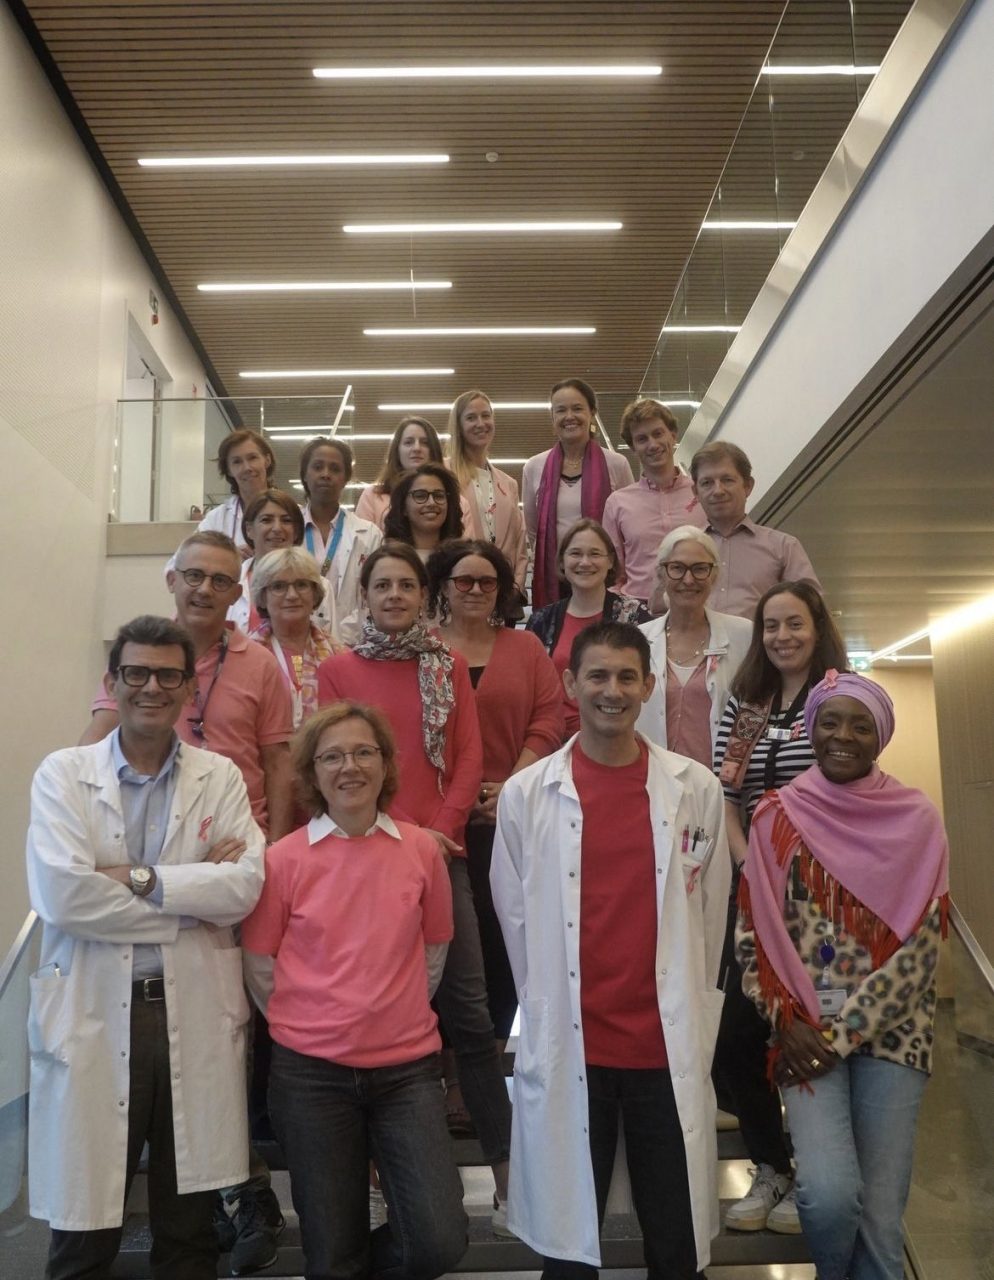 Elisa Agostinetto: Proud to be part of Institut Jules Bordet team and to work everyday with extraordinary colleagues and mentors to help fight against breast cancer.